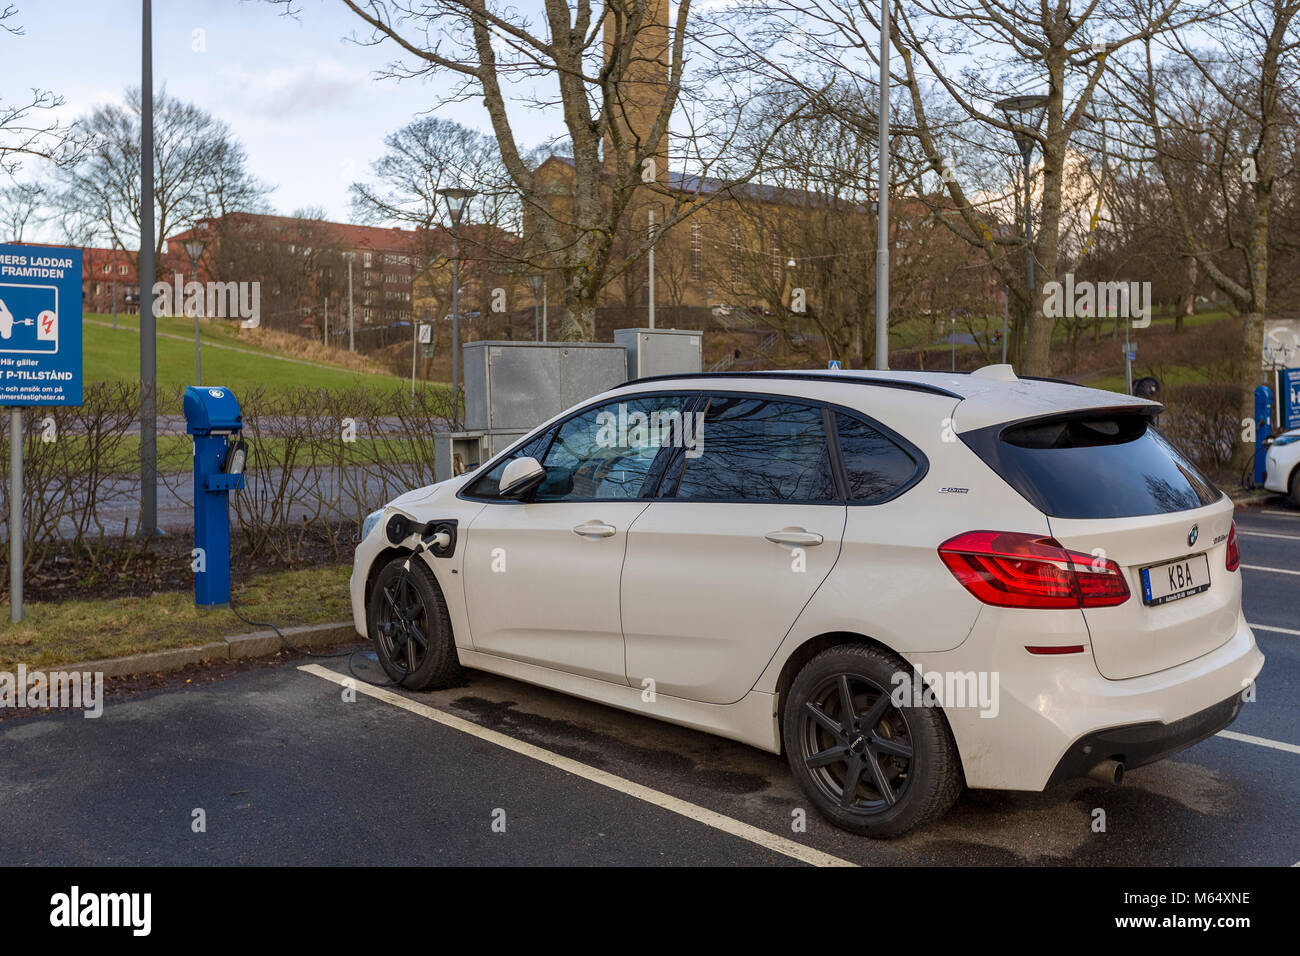 GOTHENBURG, SWEDEN - JANUARY 27 2018: Electric BMW car plugged into charging station, Chalmers University of Technology, Gothenburg, Sweden  Model Release: No.  Property Release: No. Stock Photo